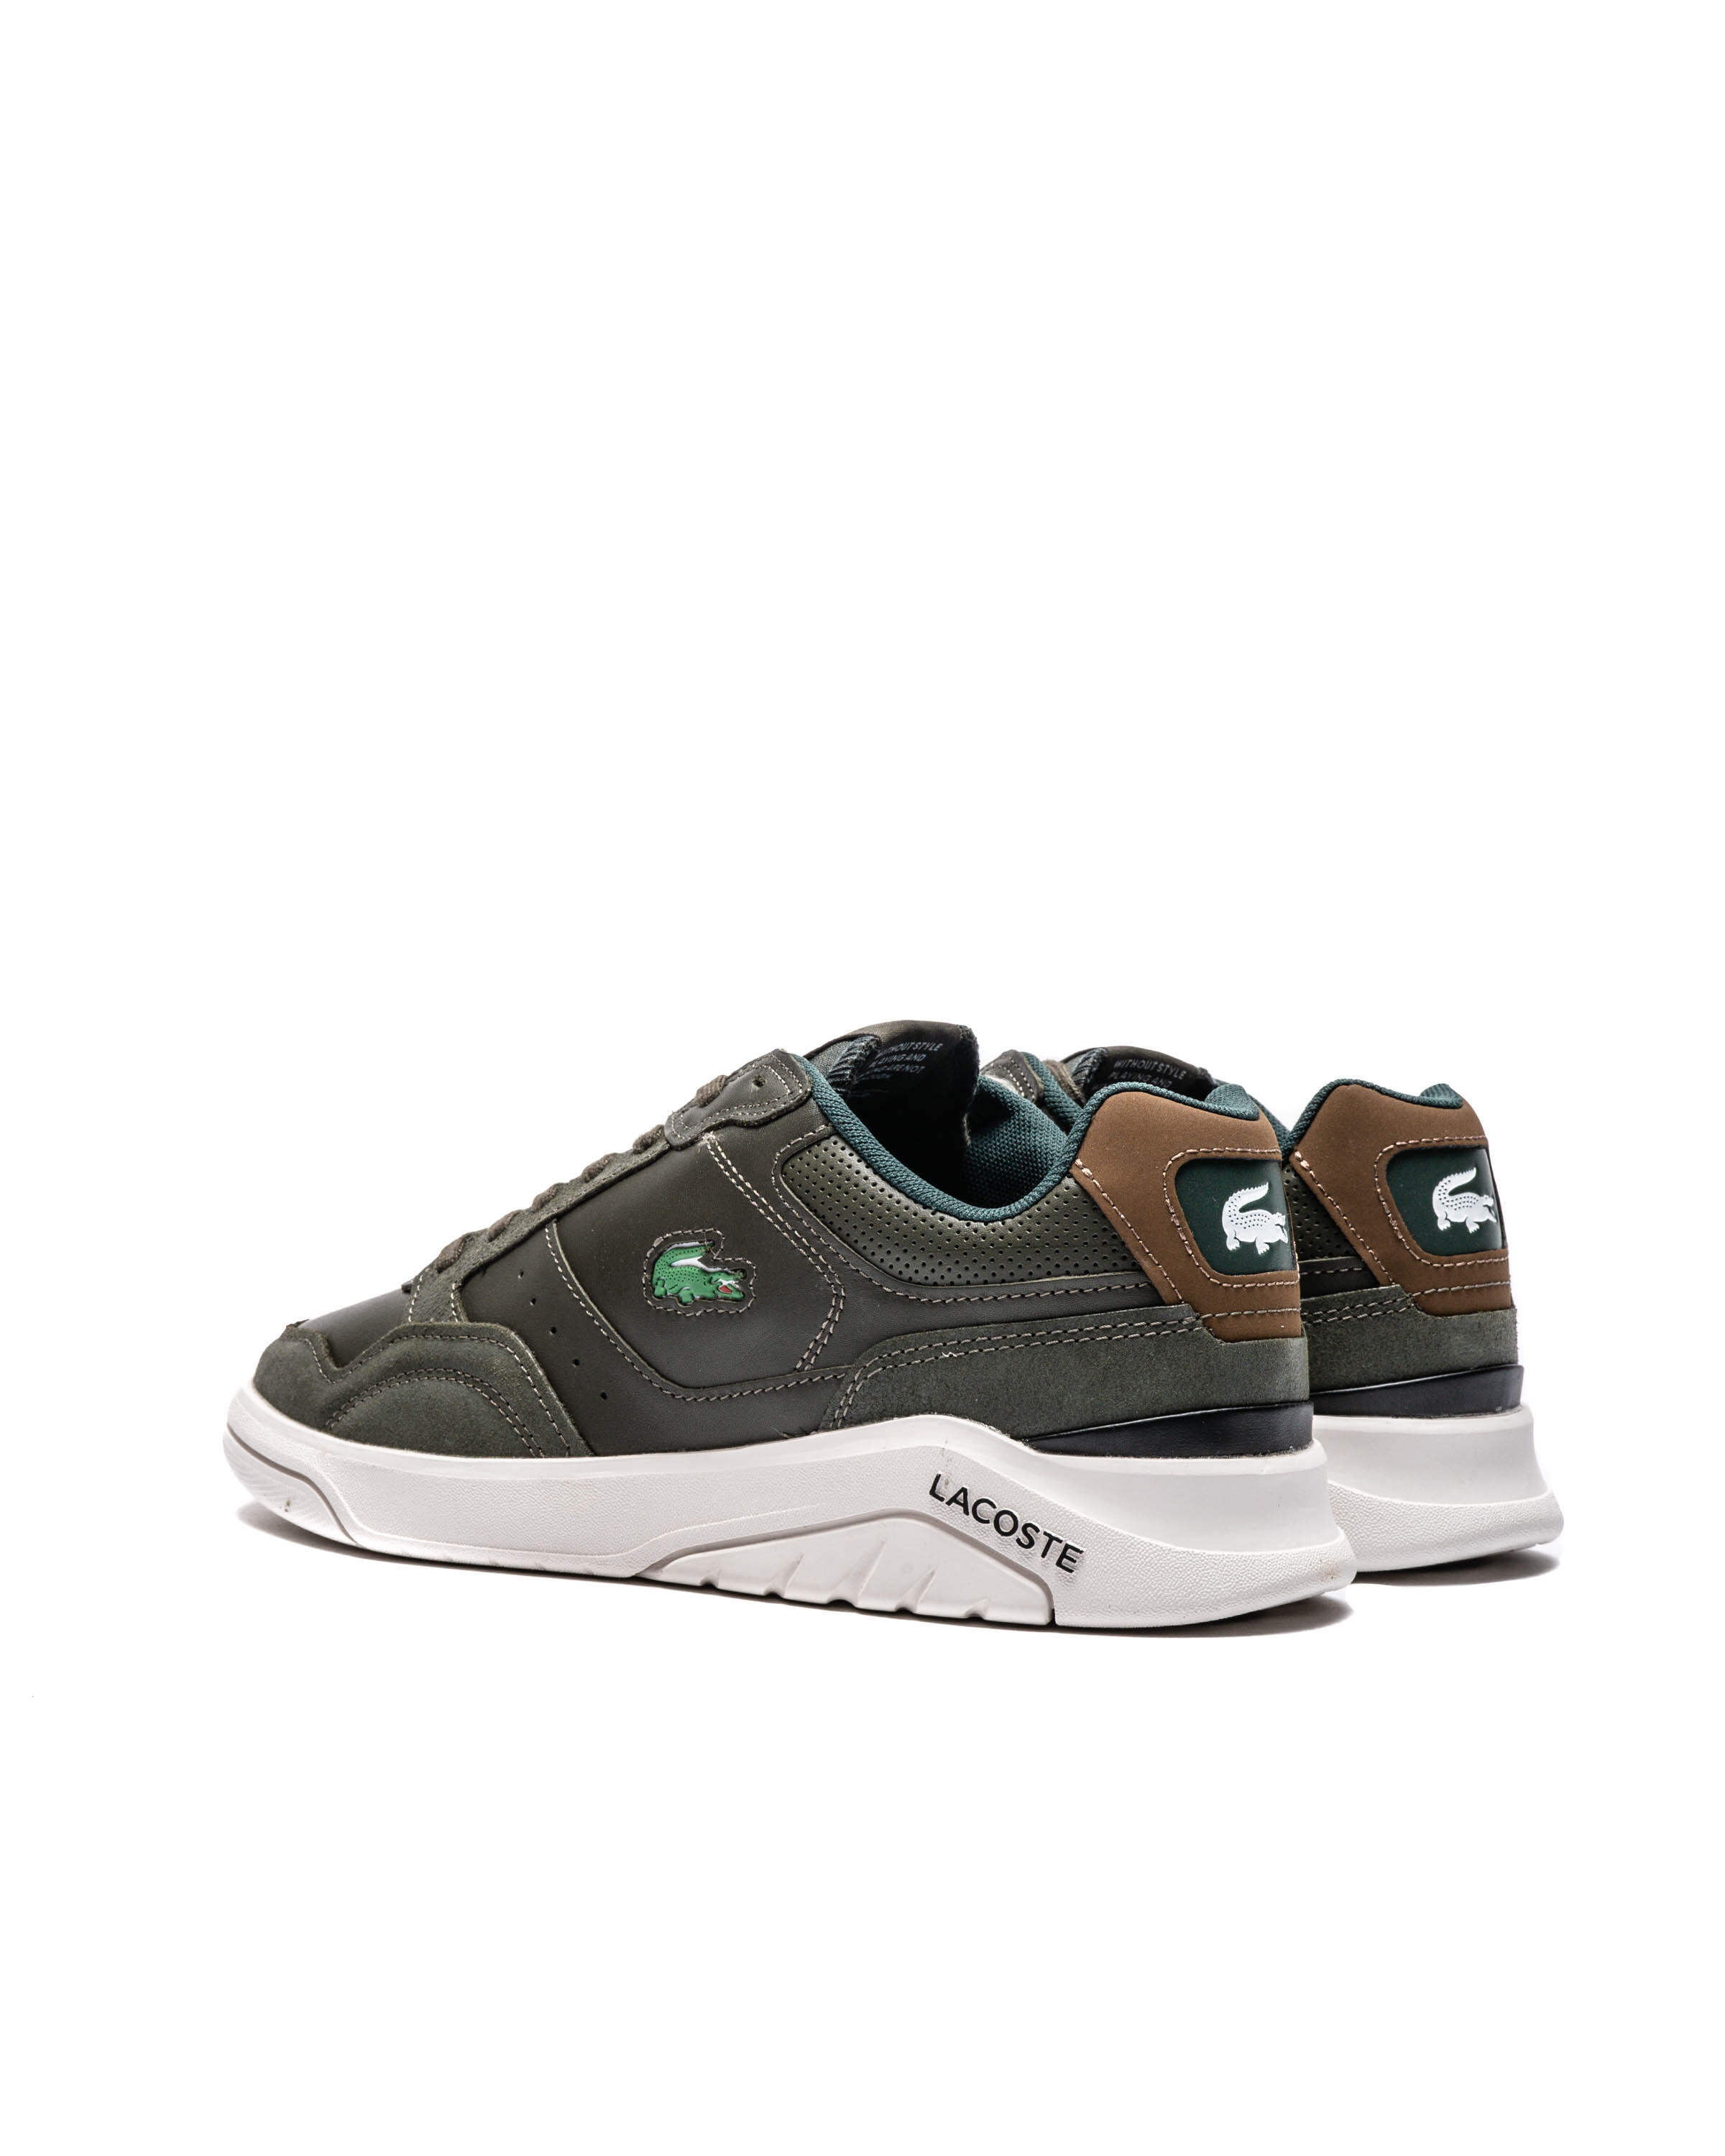 Lacoste GAME ADVANCE LUXE 2223 SM